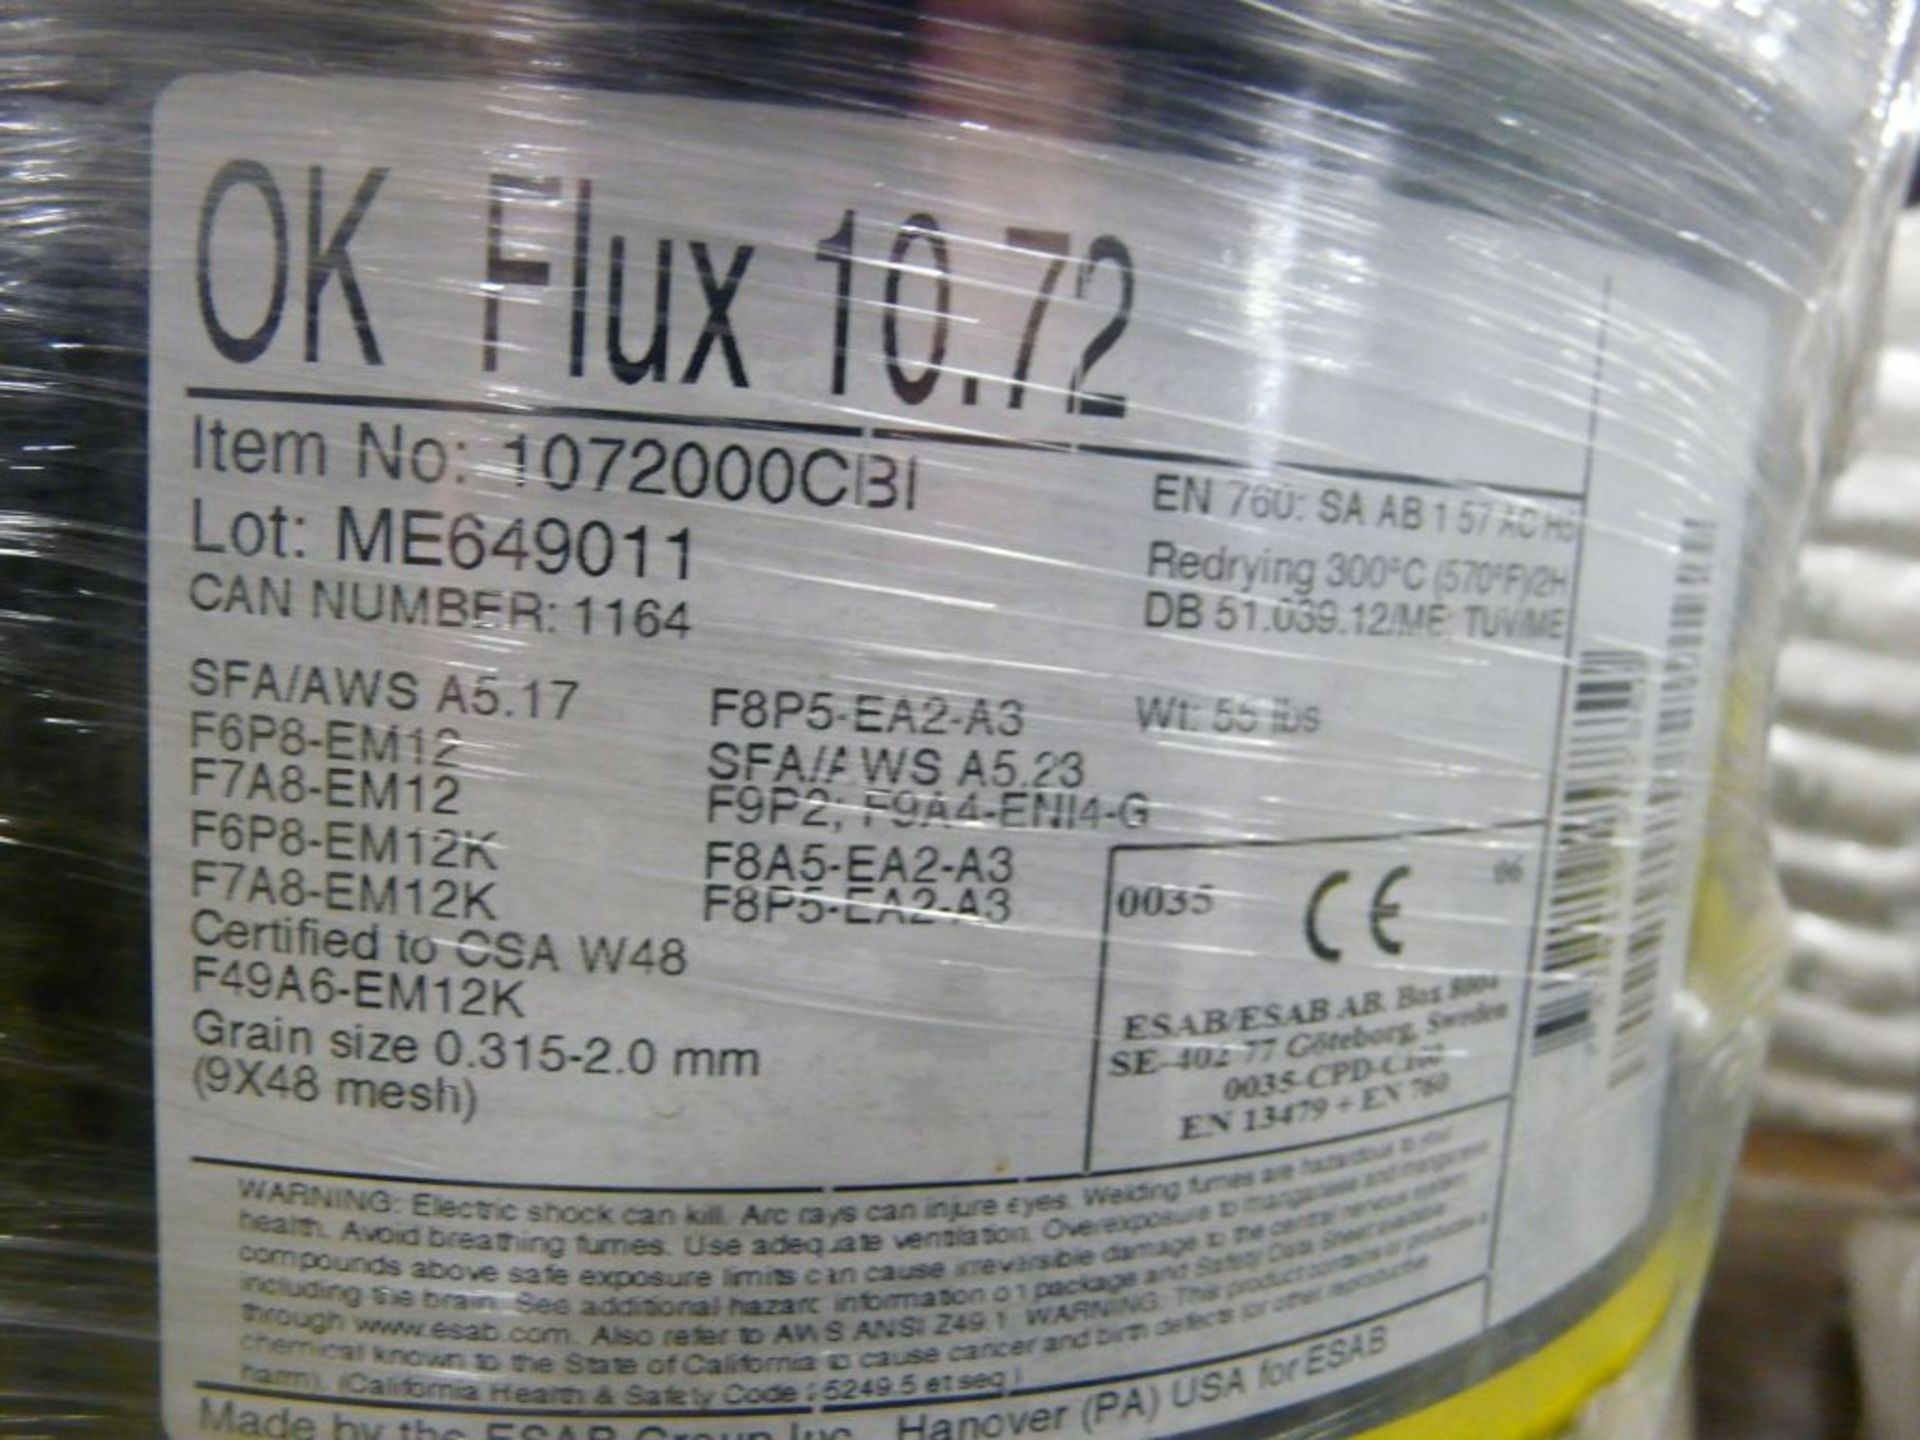 Lot of (18) Drums of ESAB OK Flux 10.72 | Part No. 1072000CBI; 55 lbs Each - Image 2 of 2